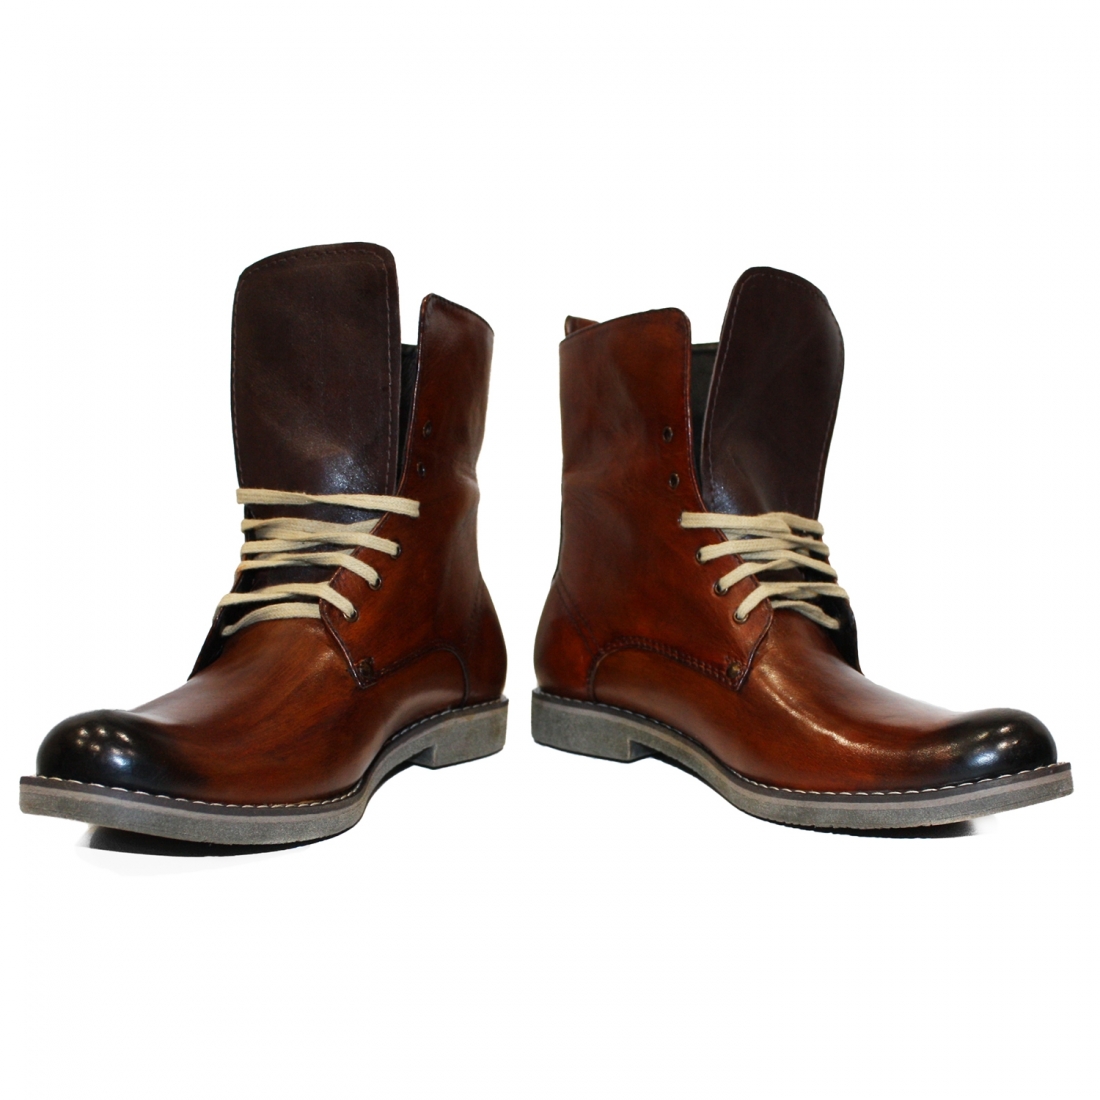 Modello Homare - High Boots - Handmade Colorful Italian Leather Shoes